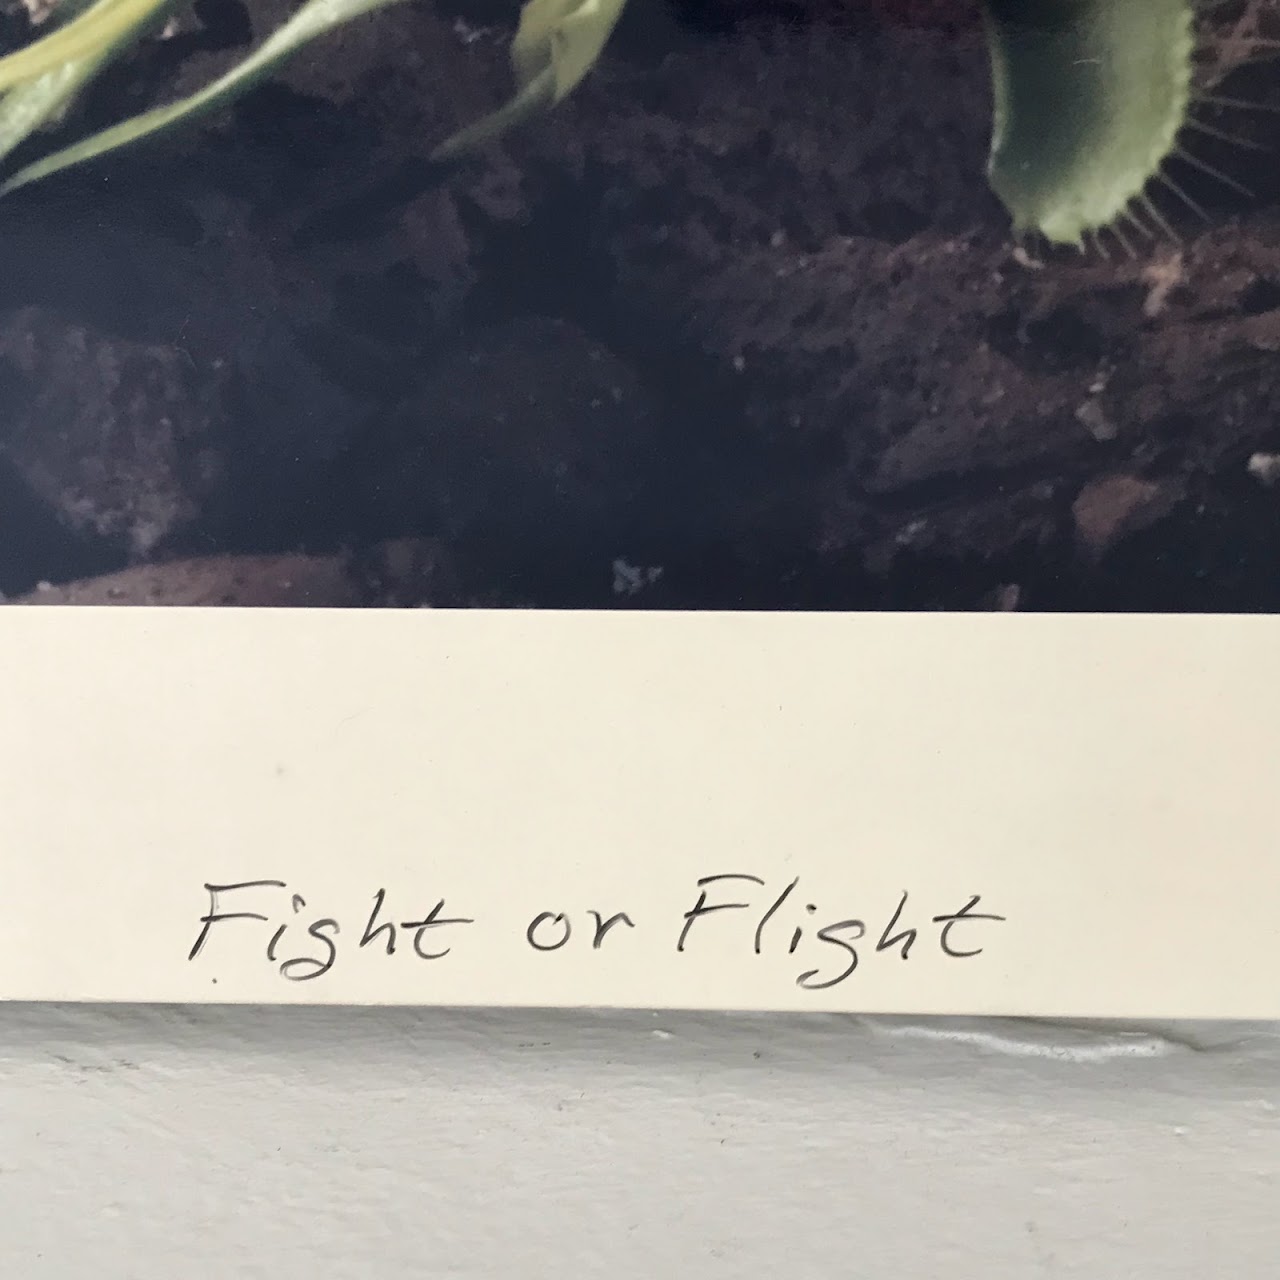 Scott Keely Signed 'Fight or Flight' Photograph